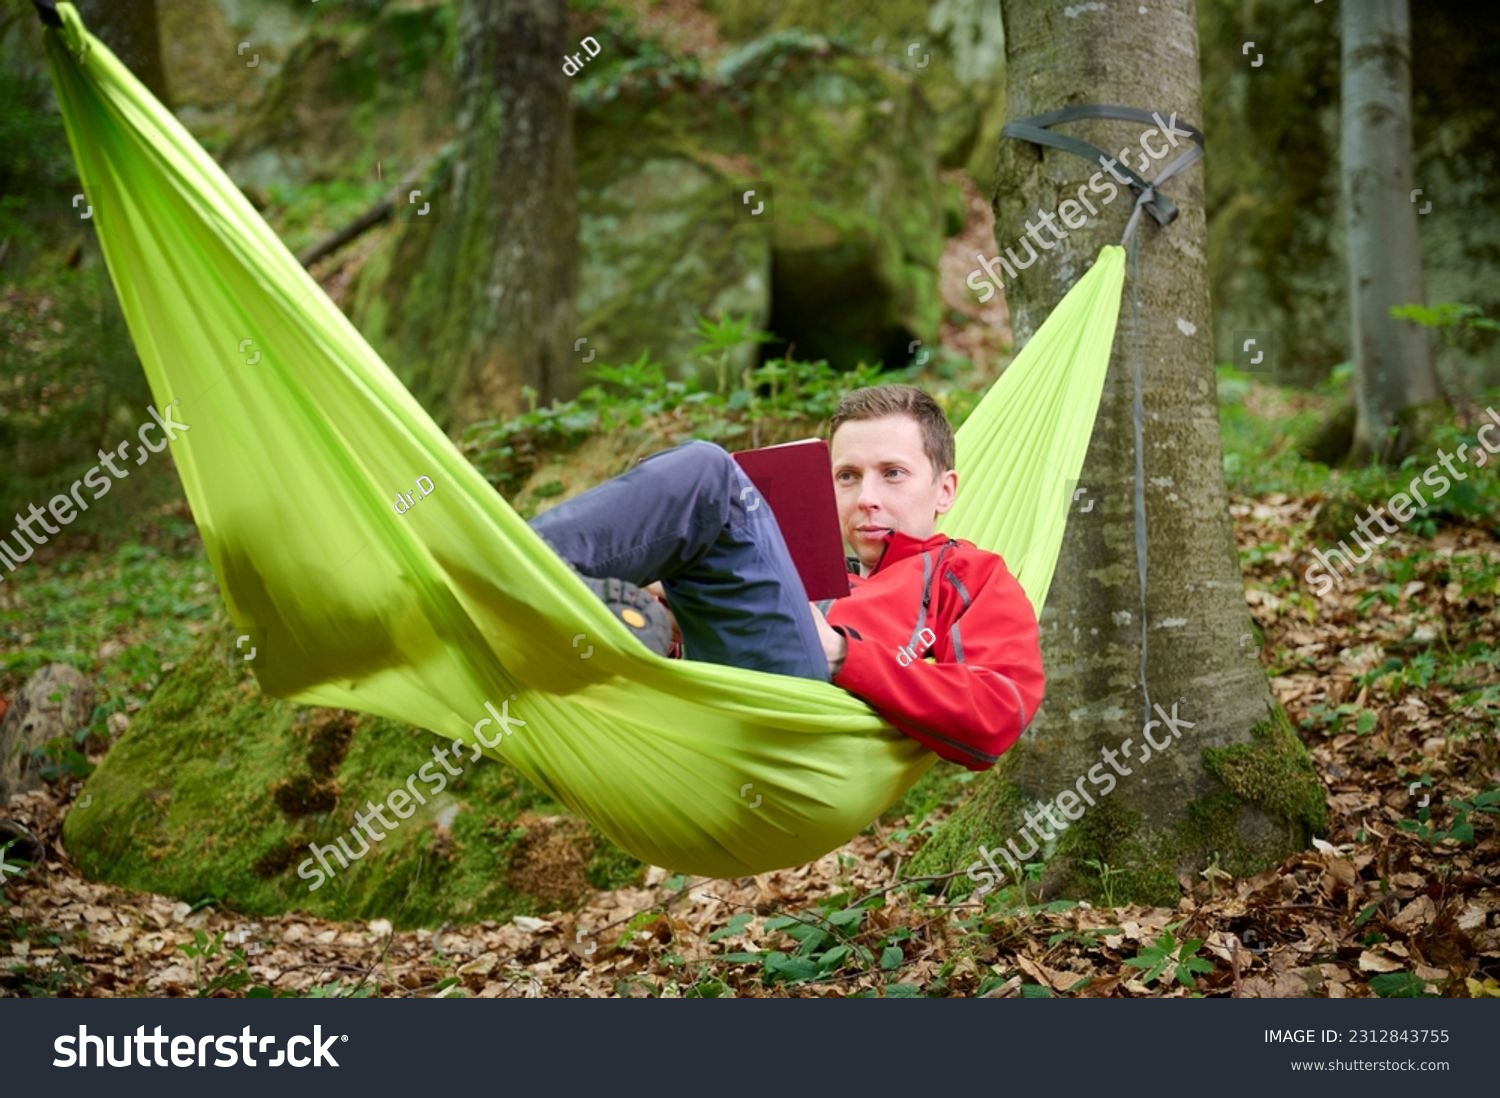 An adventurer rests in a hammock. After the expedition, the tourist rests in a hammock, reads a book in the forest, basking in the warmth of a sunny day. #2312843755